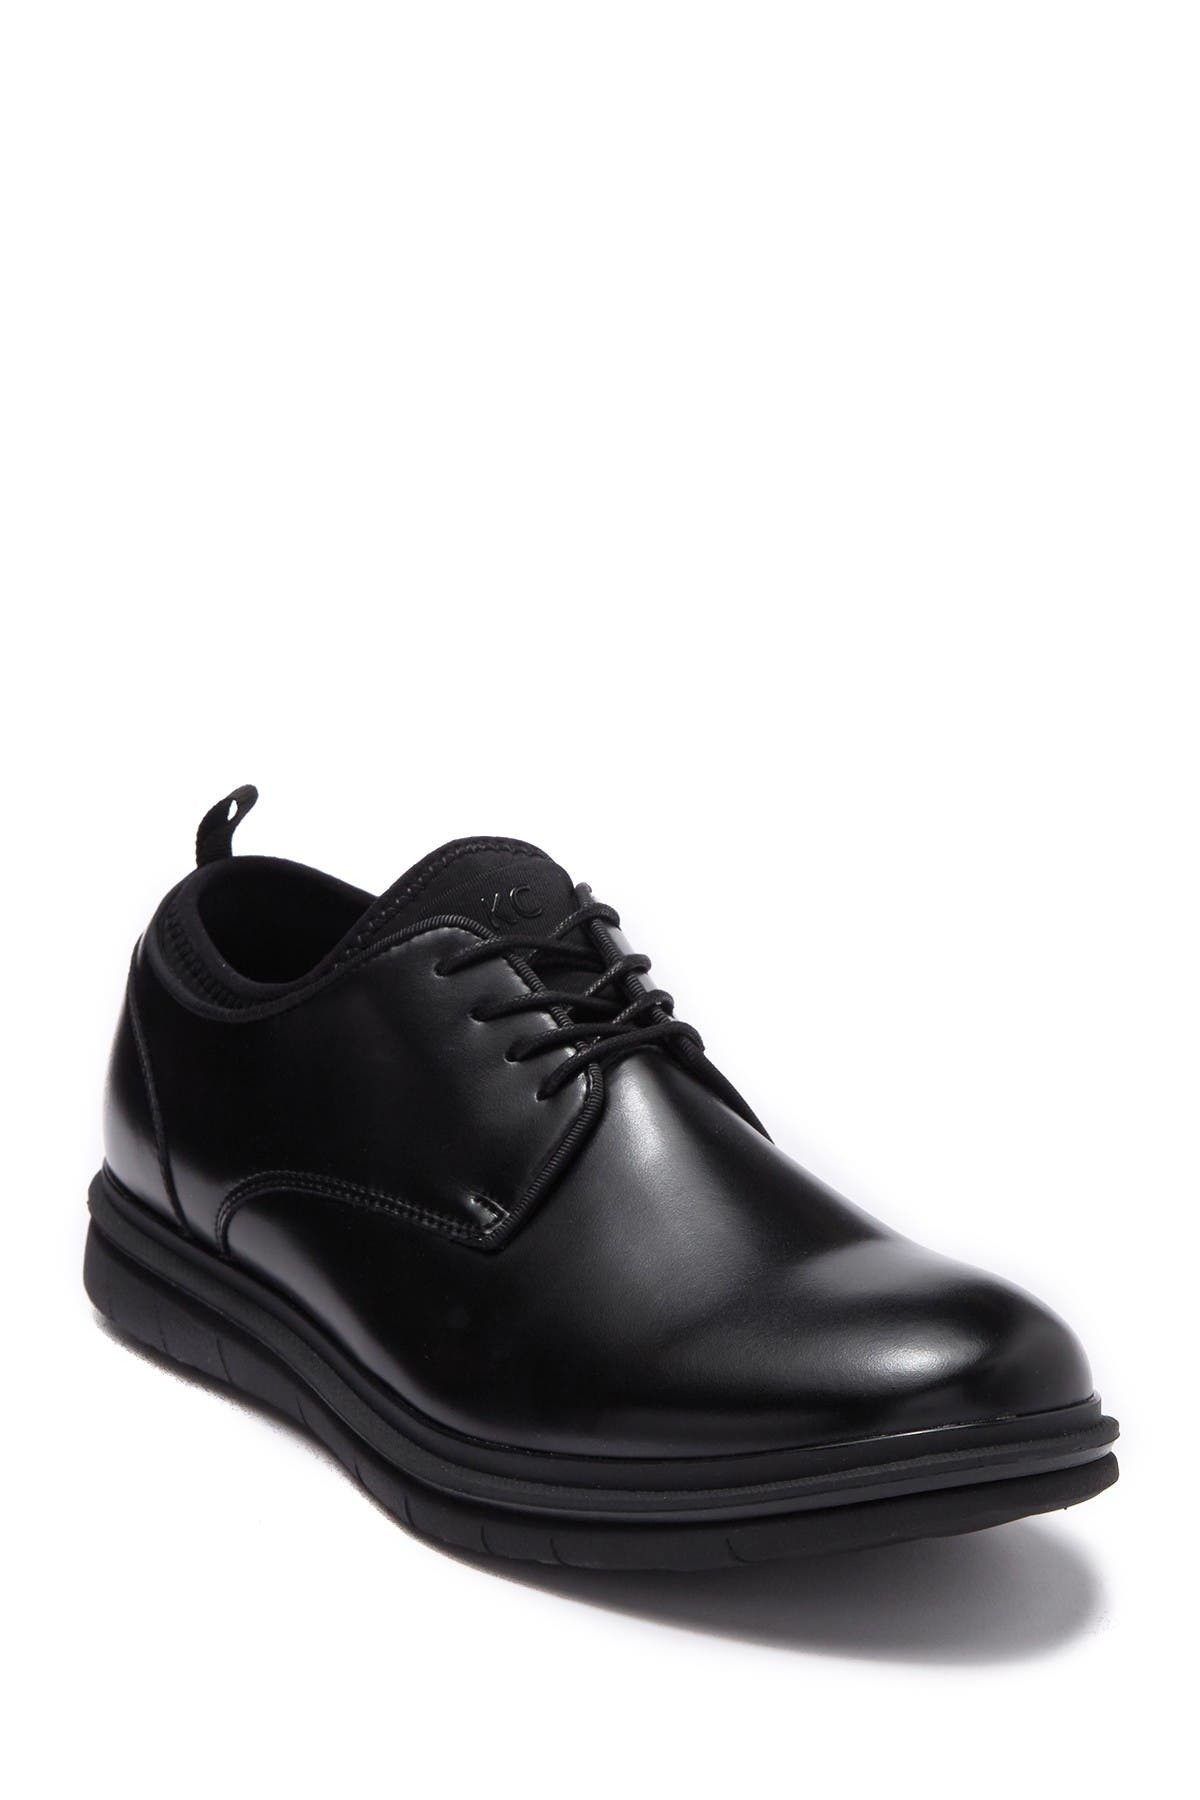 kenneth cole reaction leather cap toe oxford